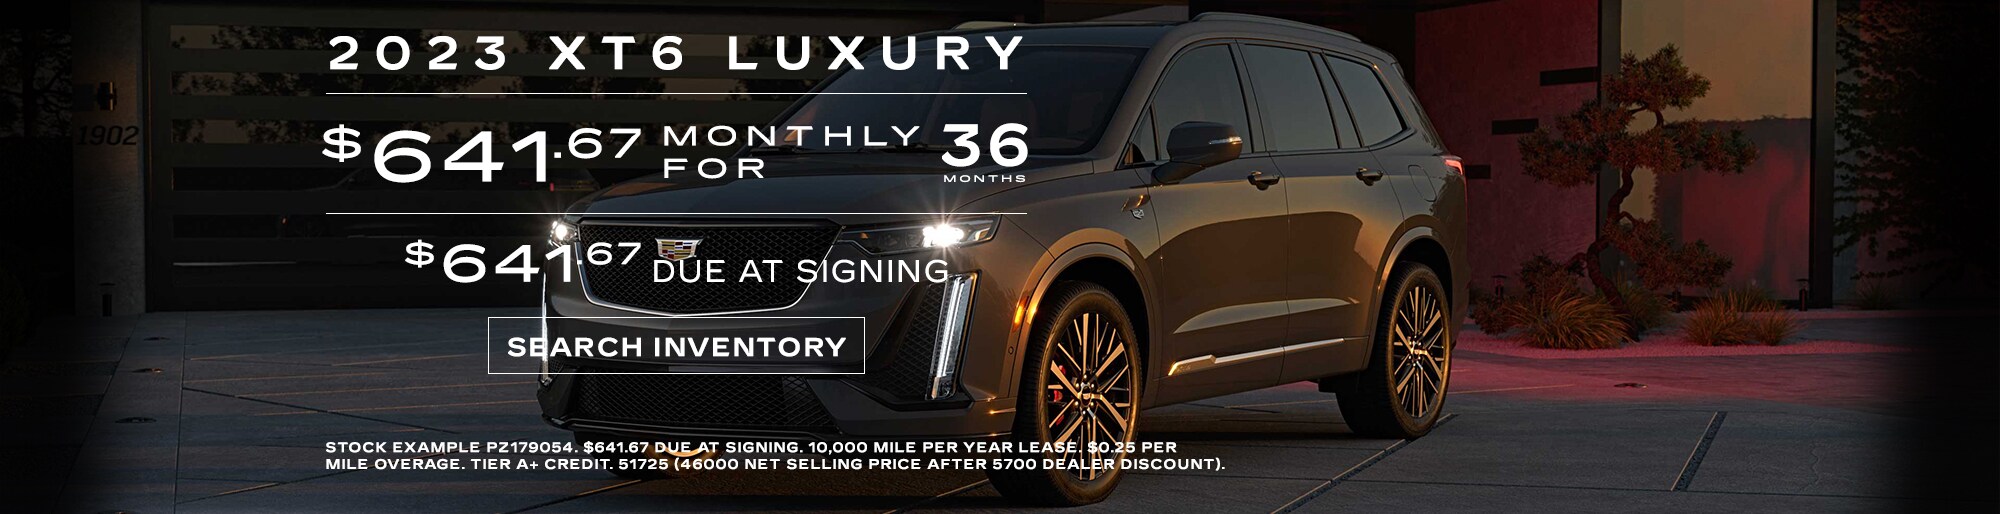 cadillac-incentives-rebates-specials-in-austin-tx-cadillac-finance-and-lease-deals-covert